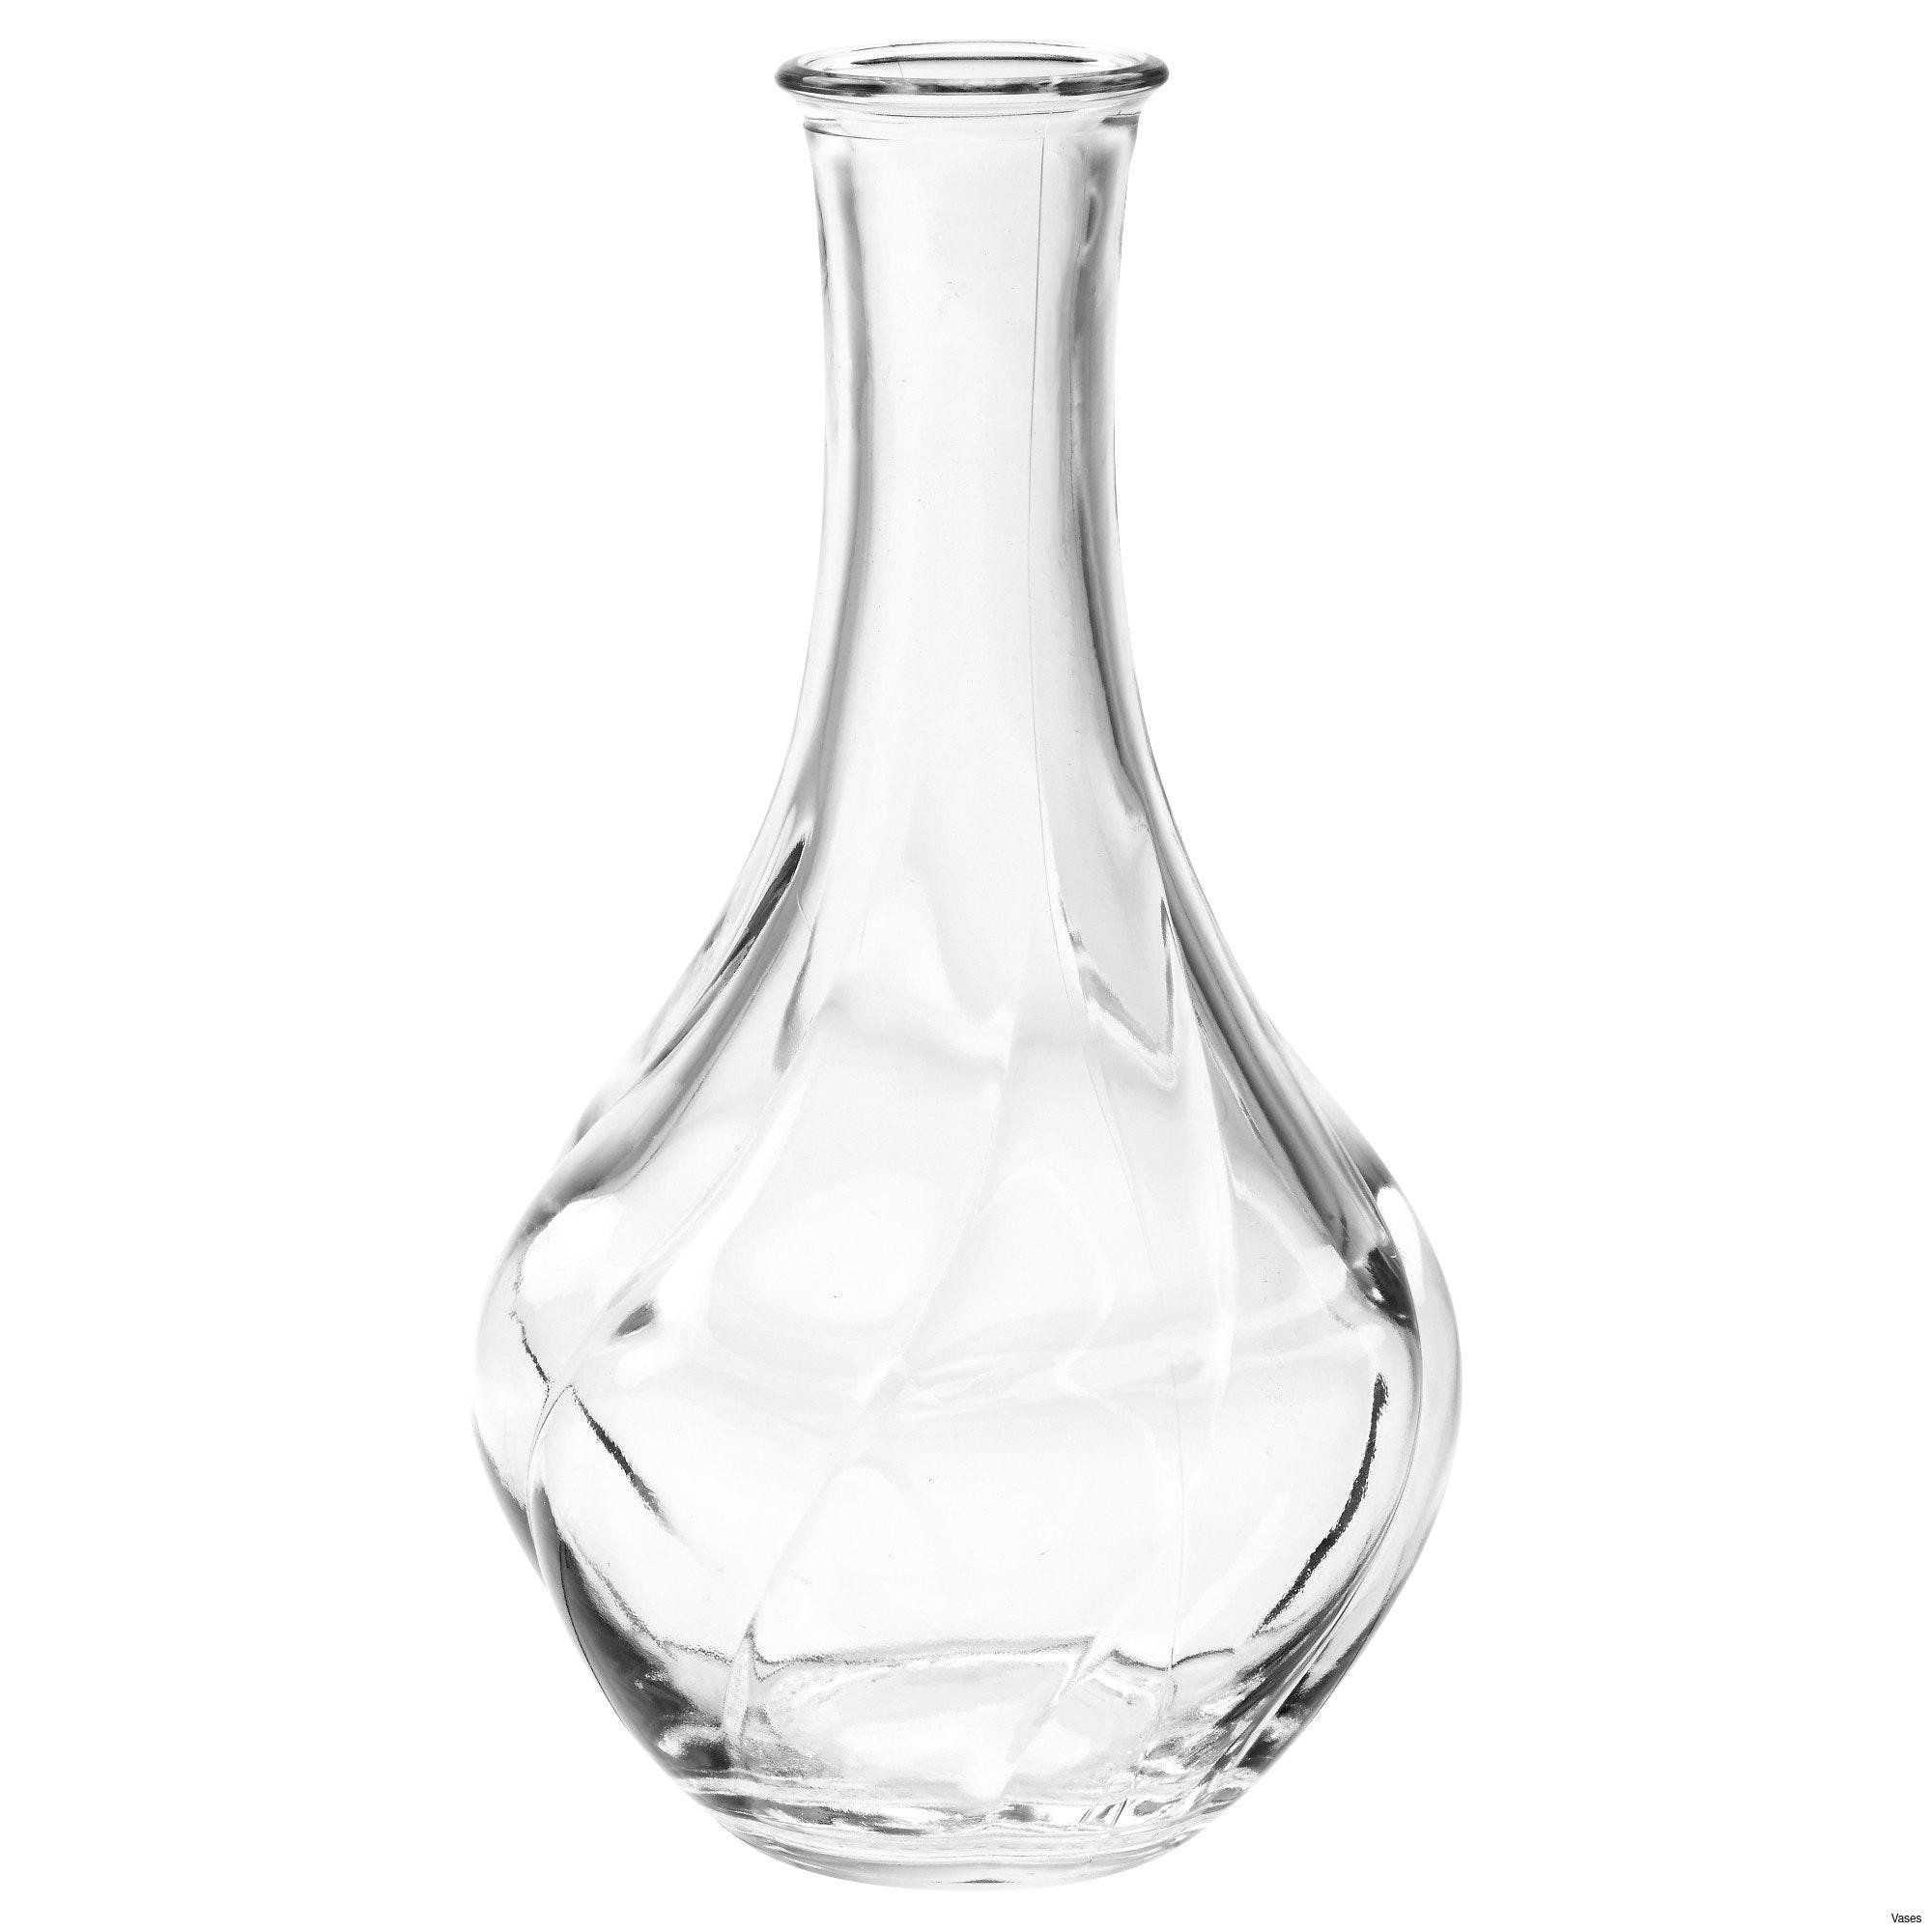 24 attractive Large Vase Decor 2024 free download large vase decor of beautiful large clear glass vases otsego go info within large clear glass vases awesome living room glass vases fresh clear vase 0d tags amazing and of large clear glass 